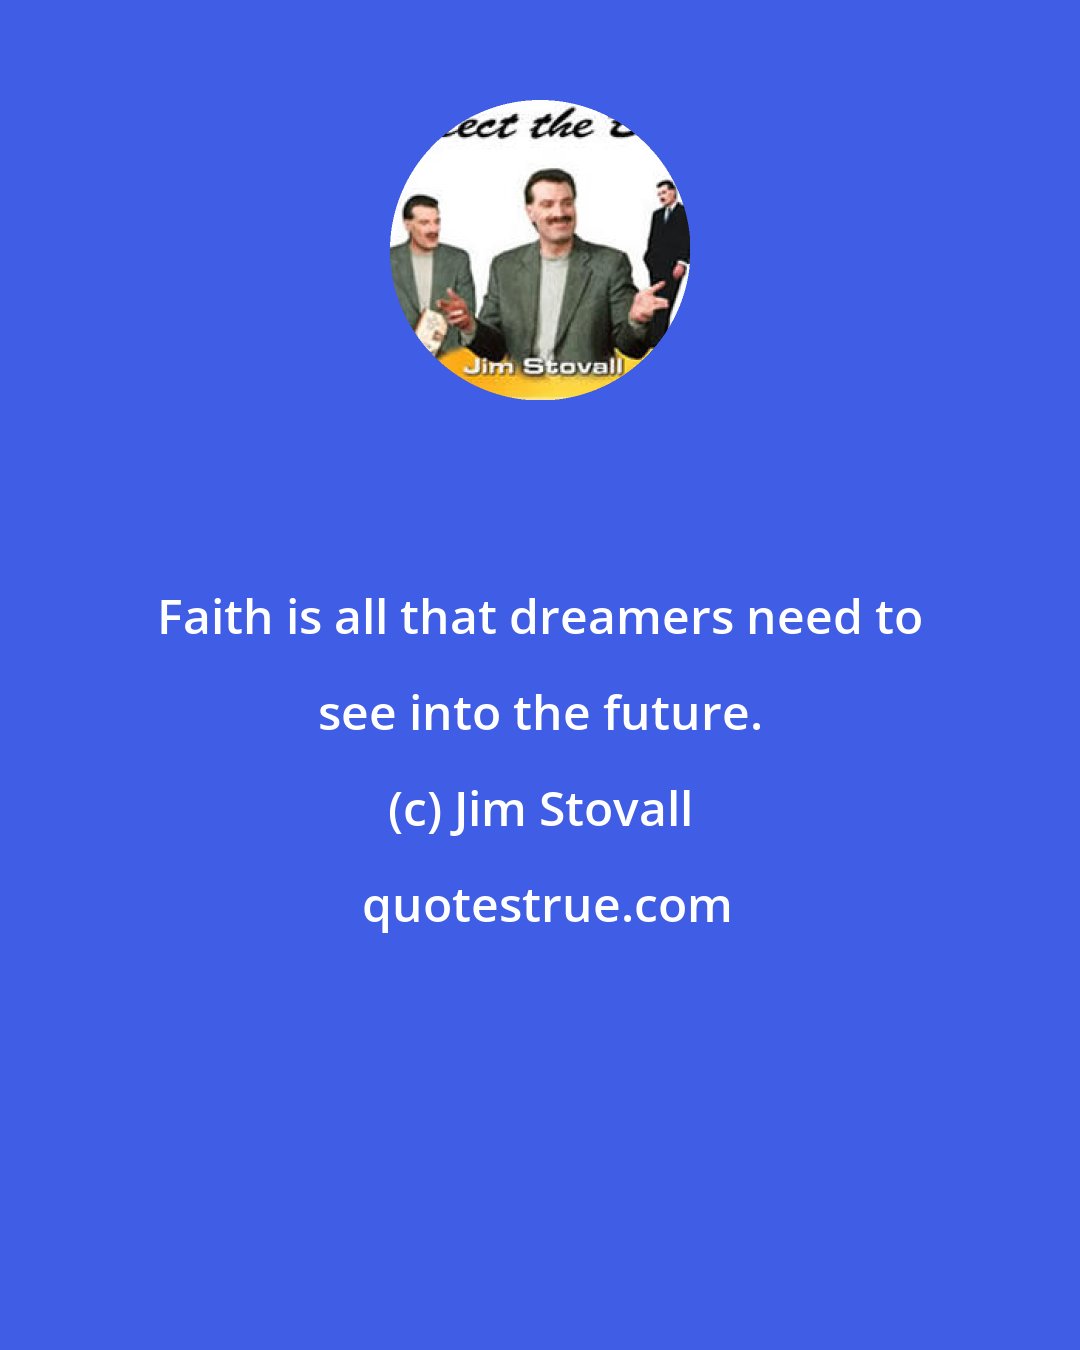 Jim Stovall: Faith is all that dreamers need to see into the future.